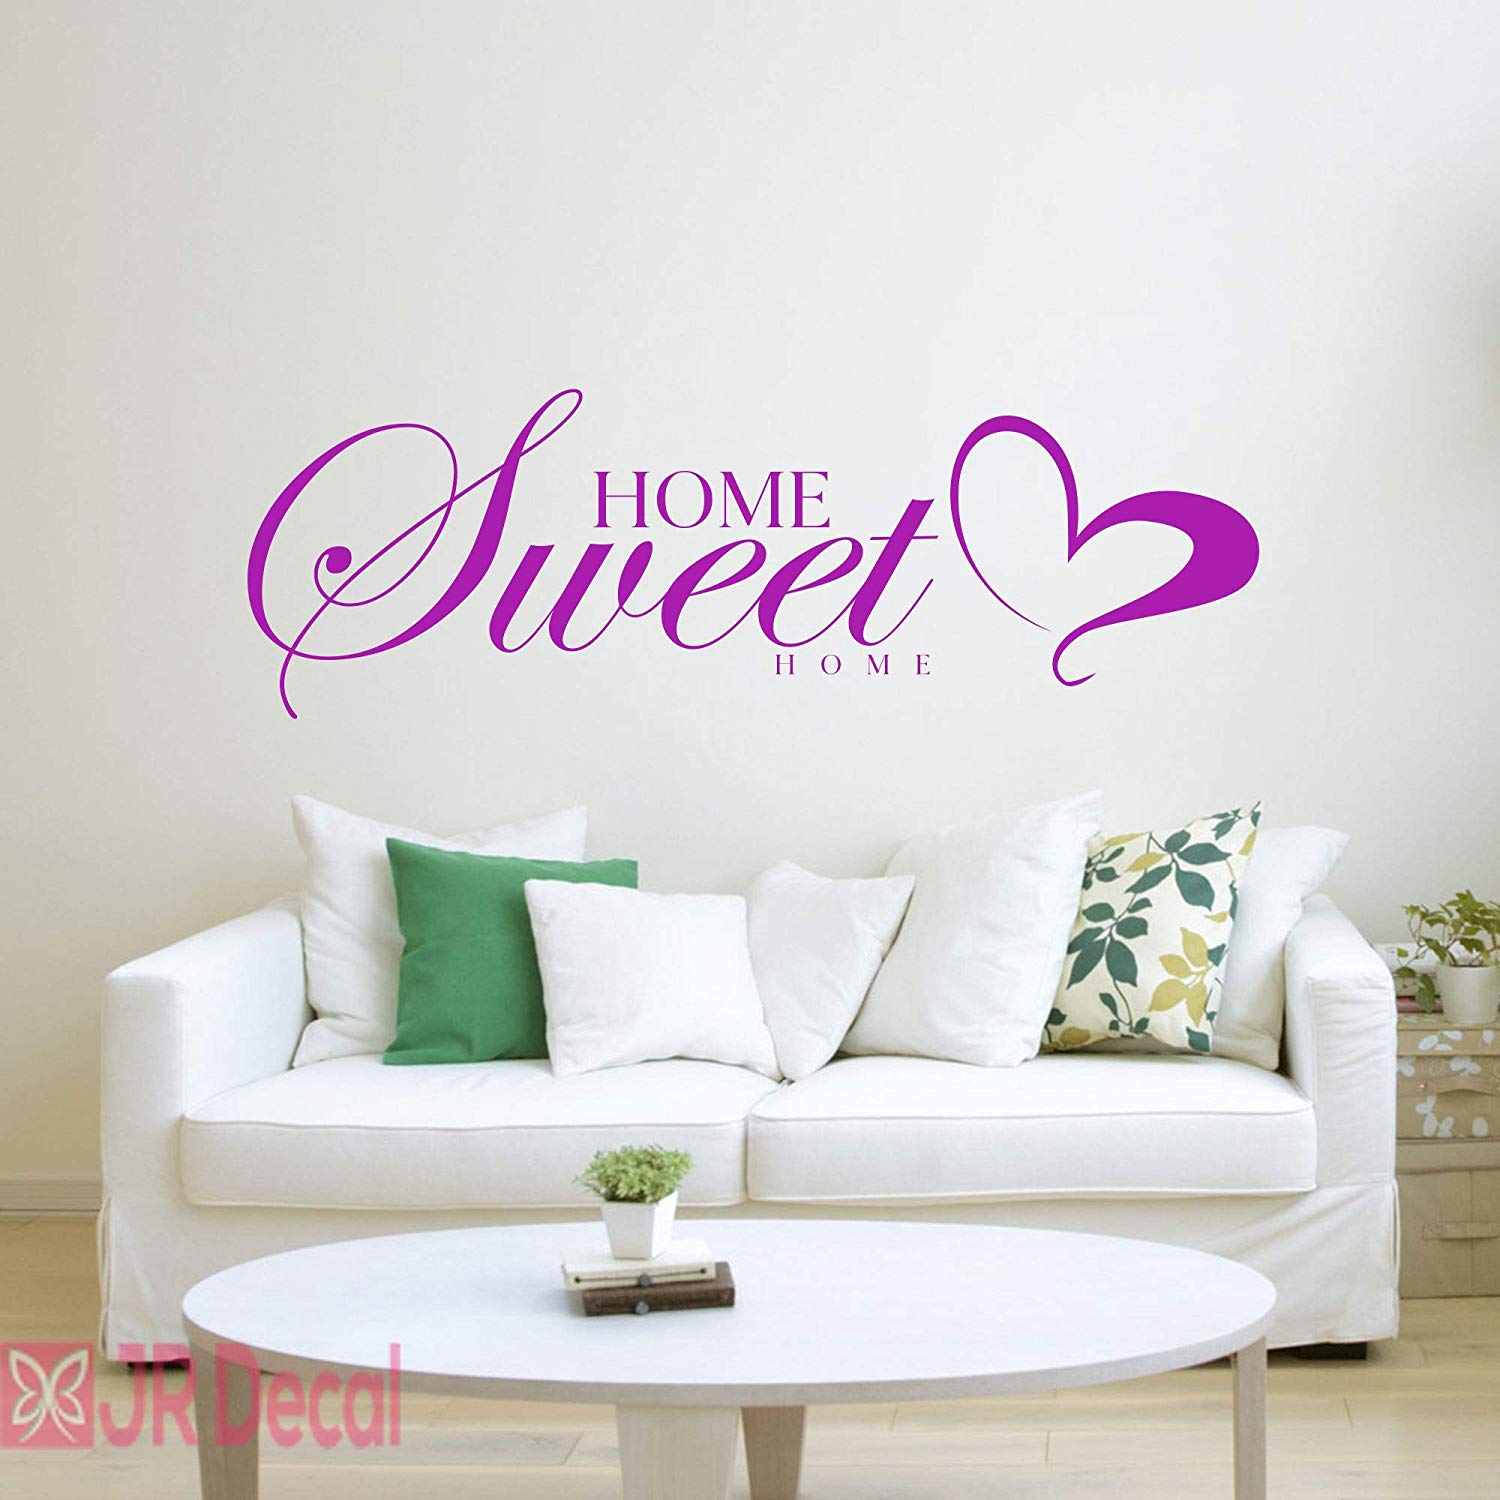 Home Sweet Home' Living Room Decor – JR Decal Wall Stickers